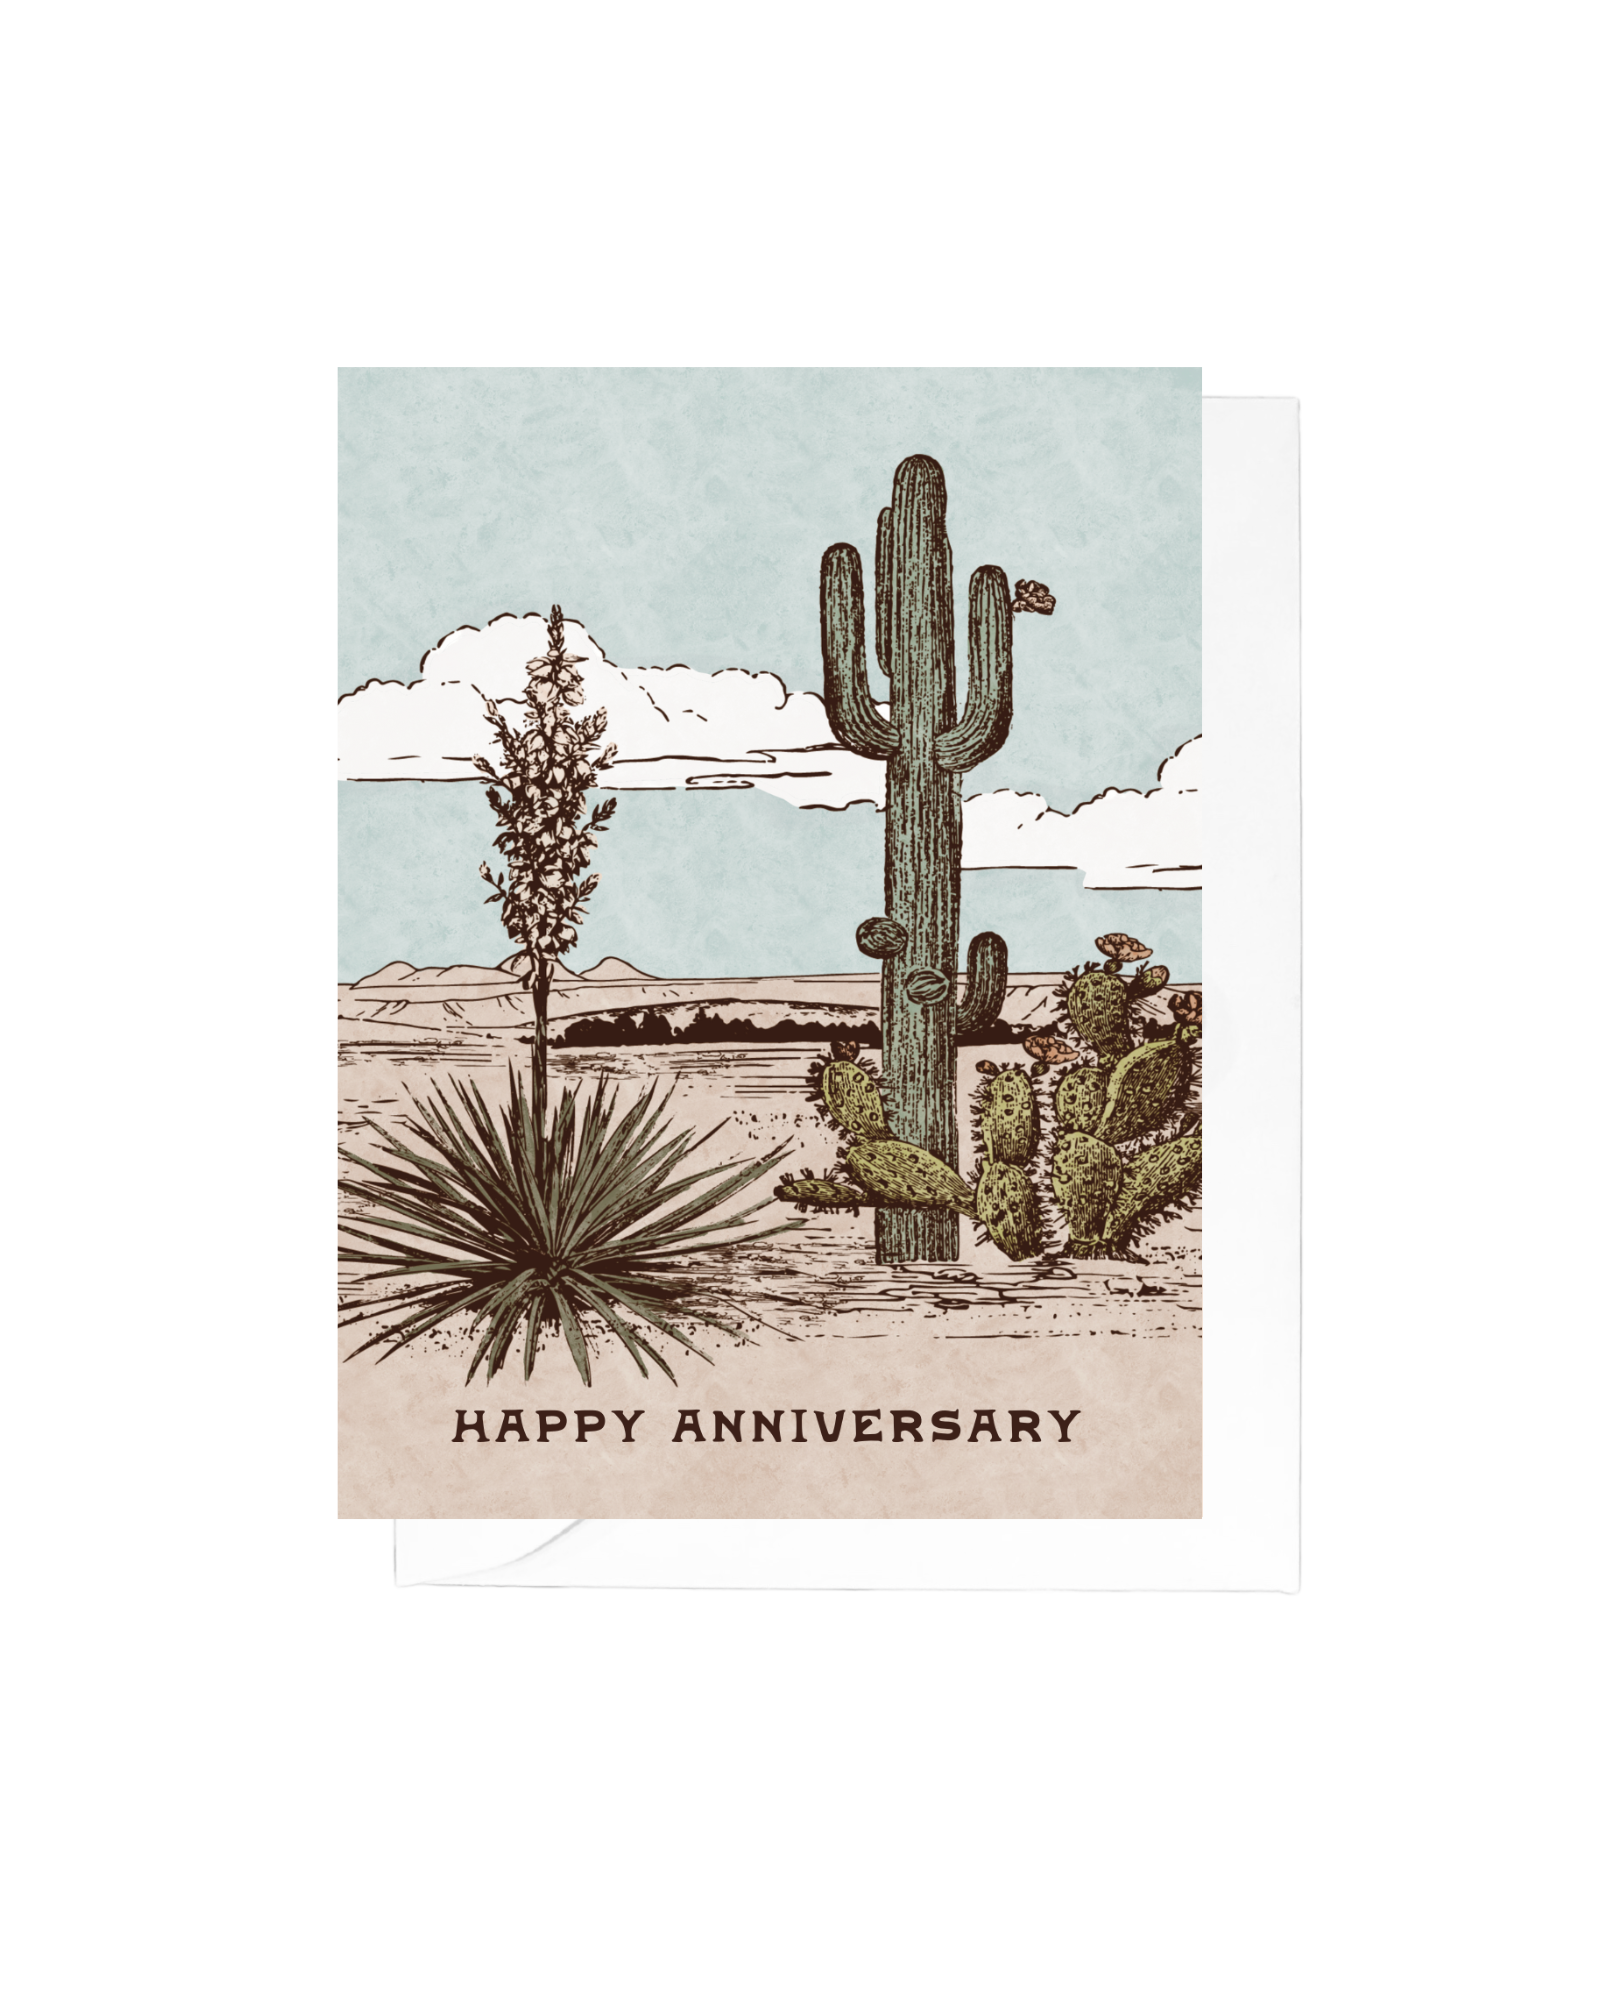 Greeting card of a desert landcape scene and the words "happy anniversary" bottom center